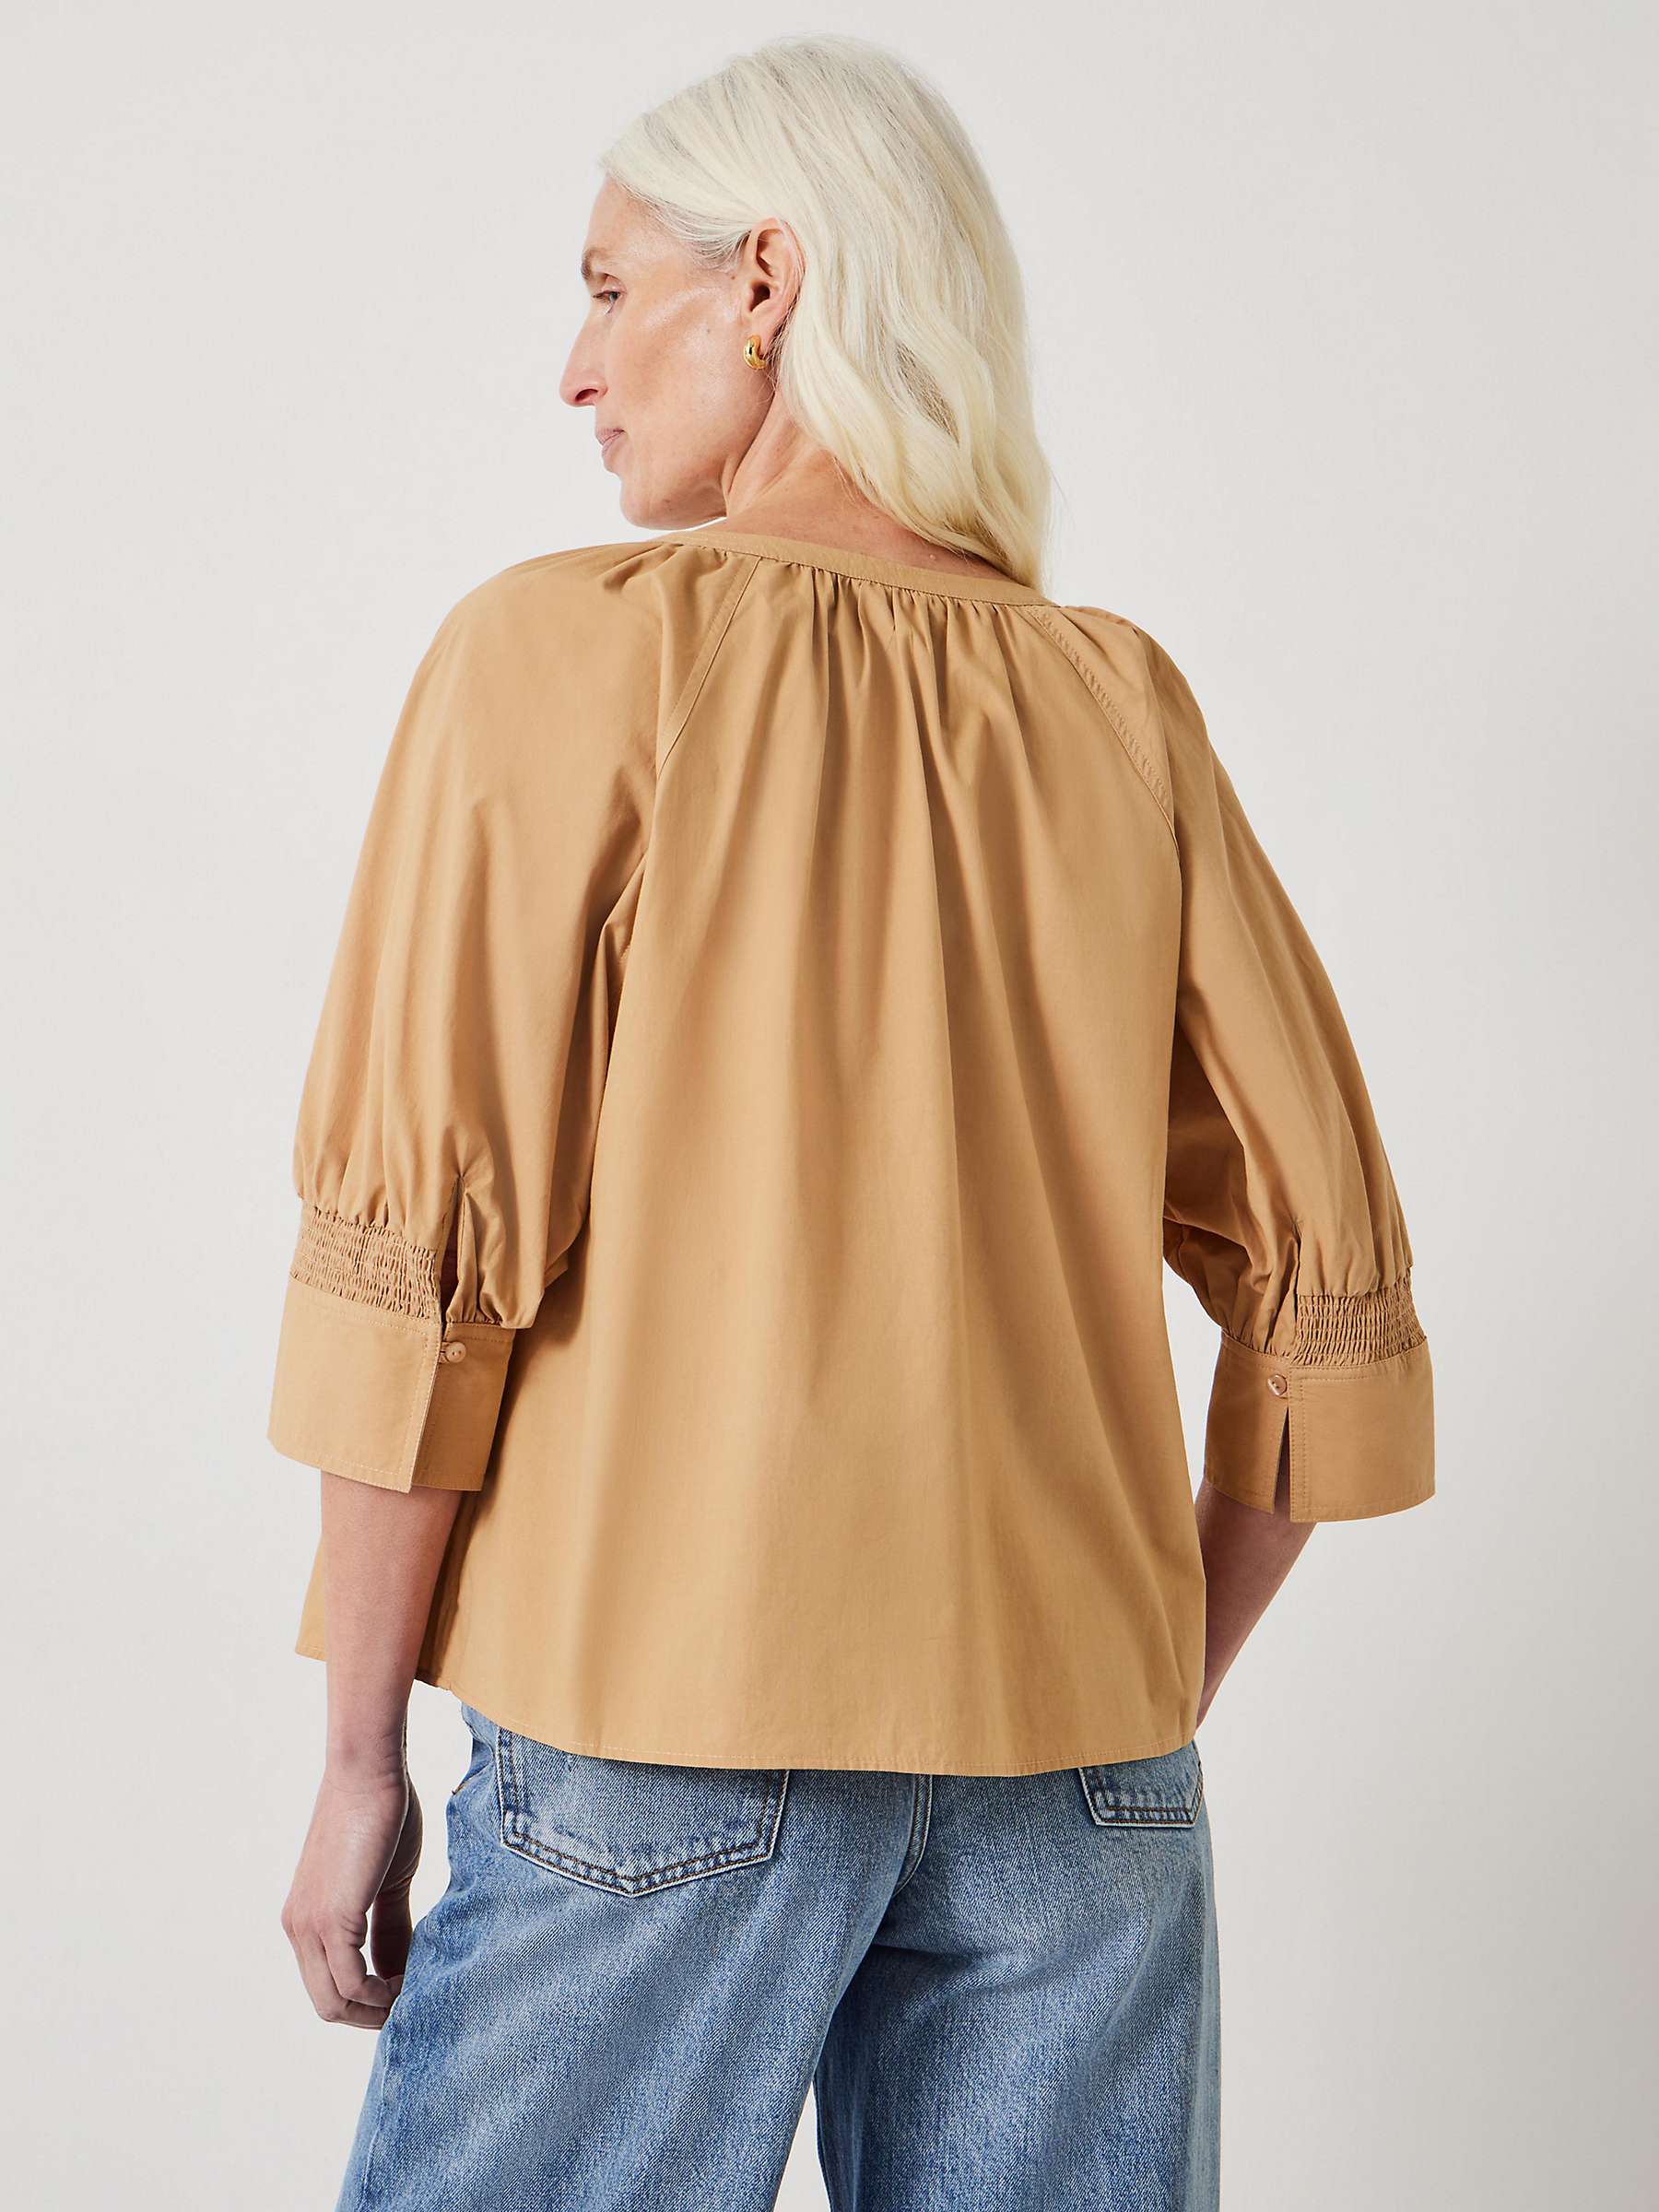 Buy HUSH Charlee Button Cotton Top Online at johnlewis.com